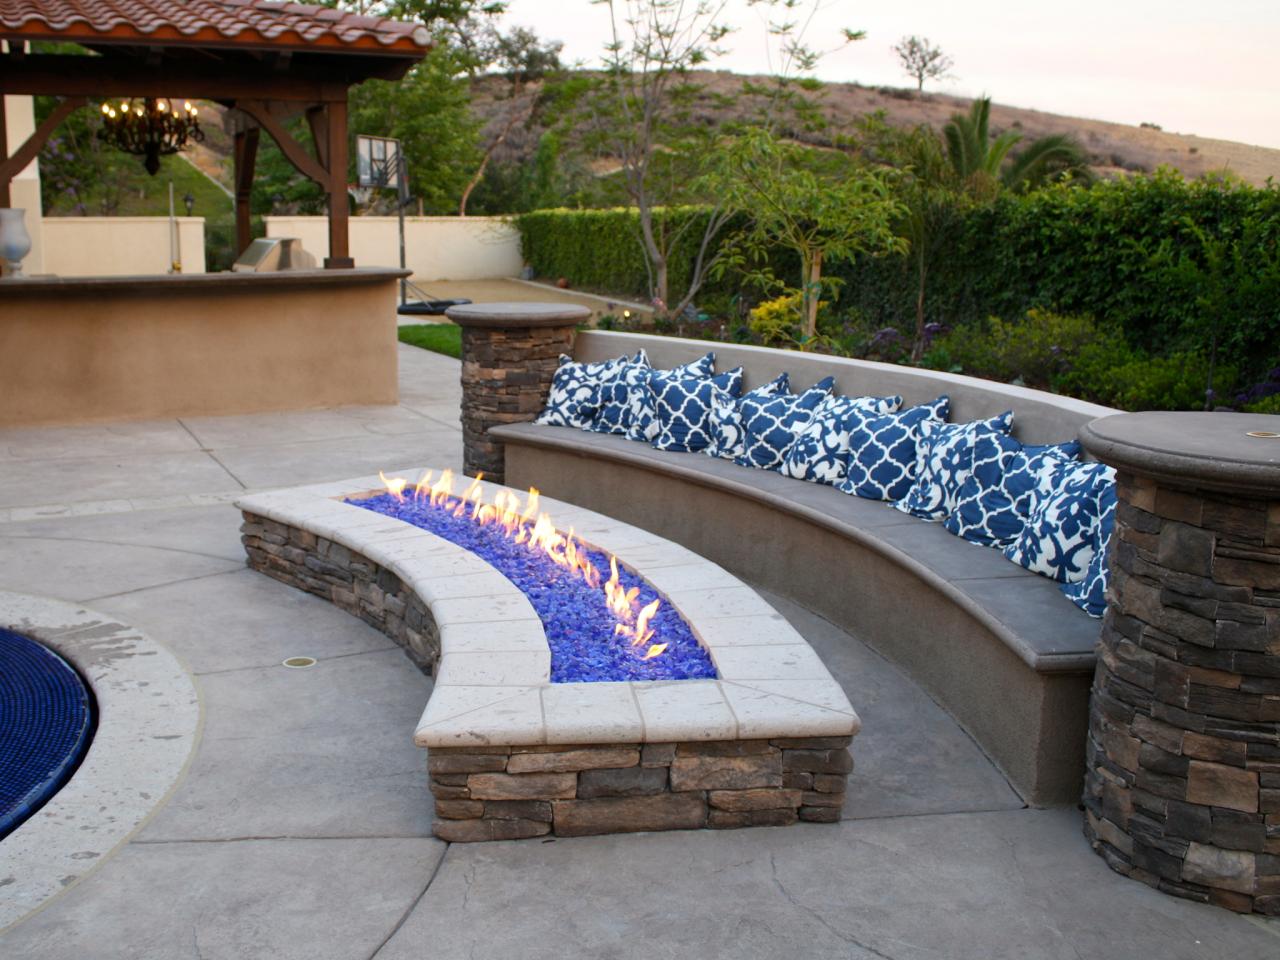 Designing A Patio Around Fire Pit Diy, Outdoor Fire Pit Tiles